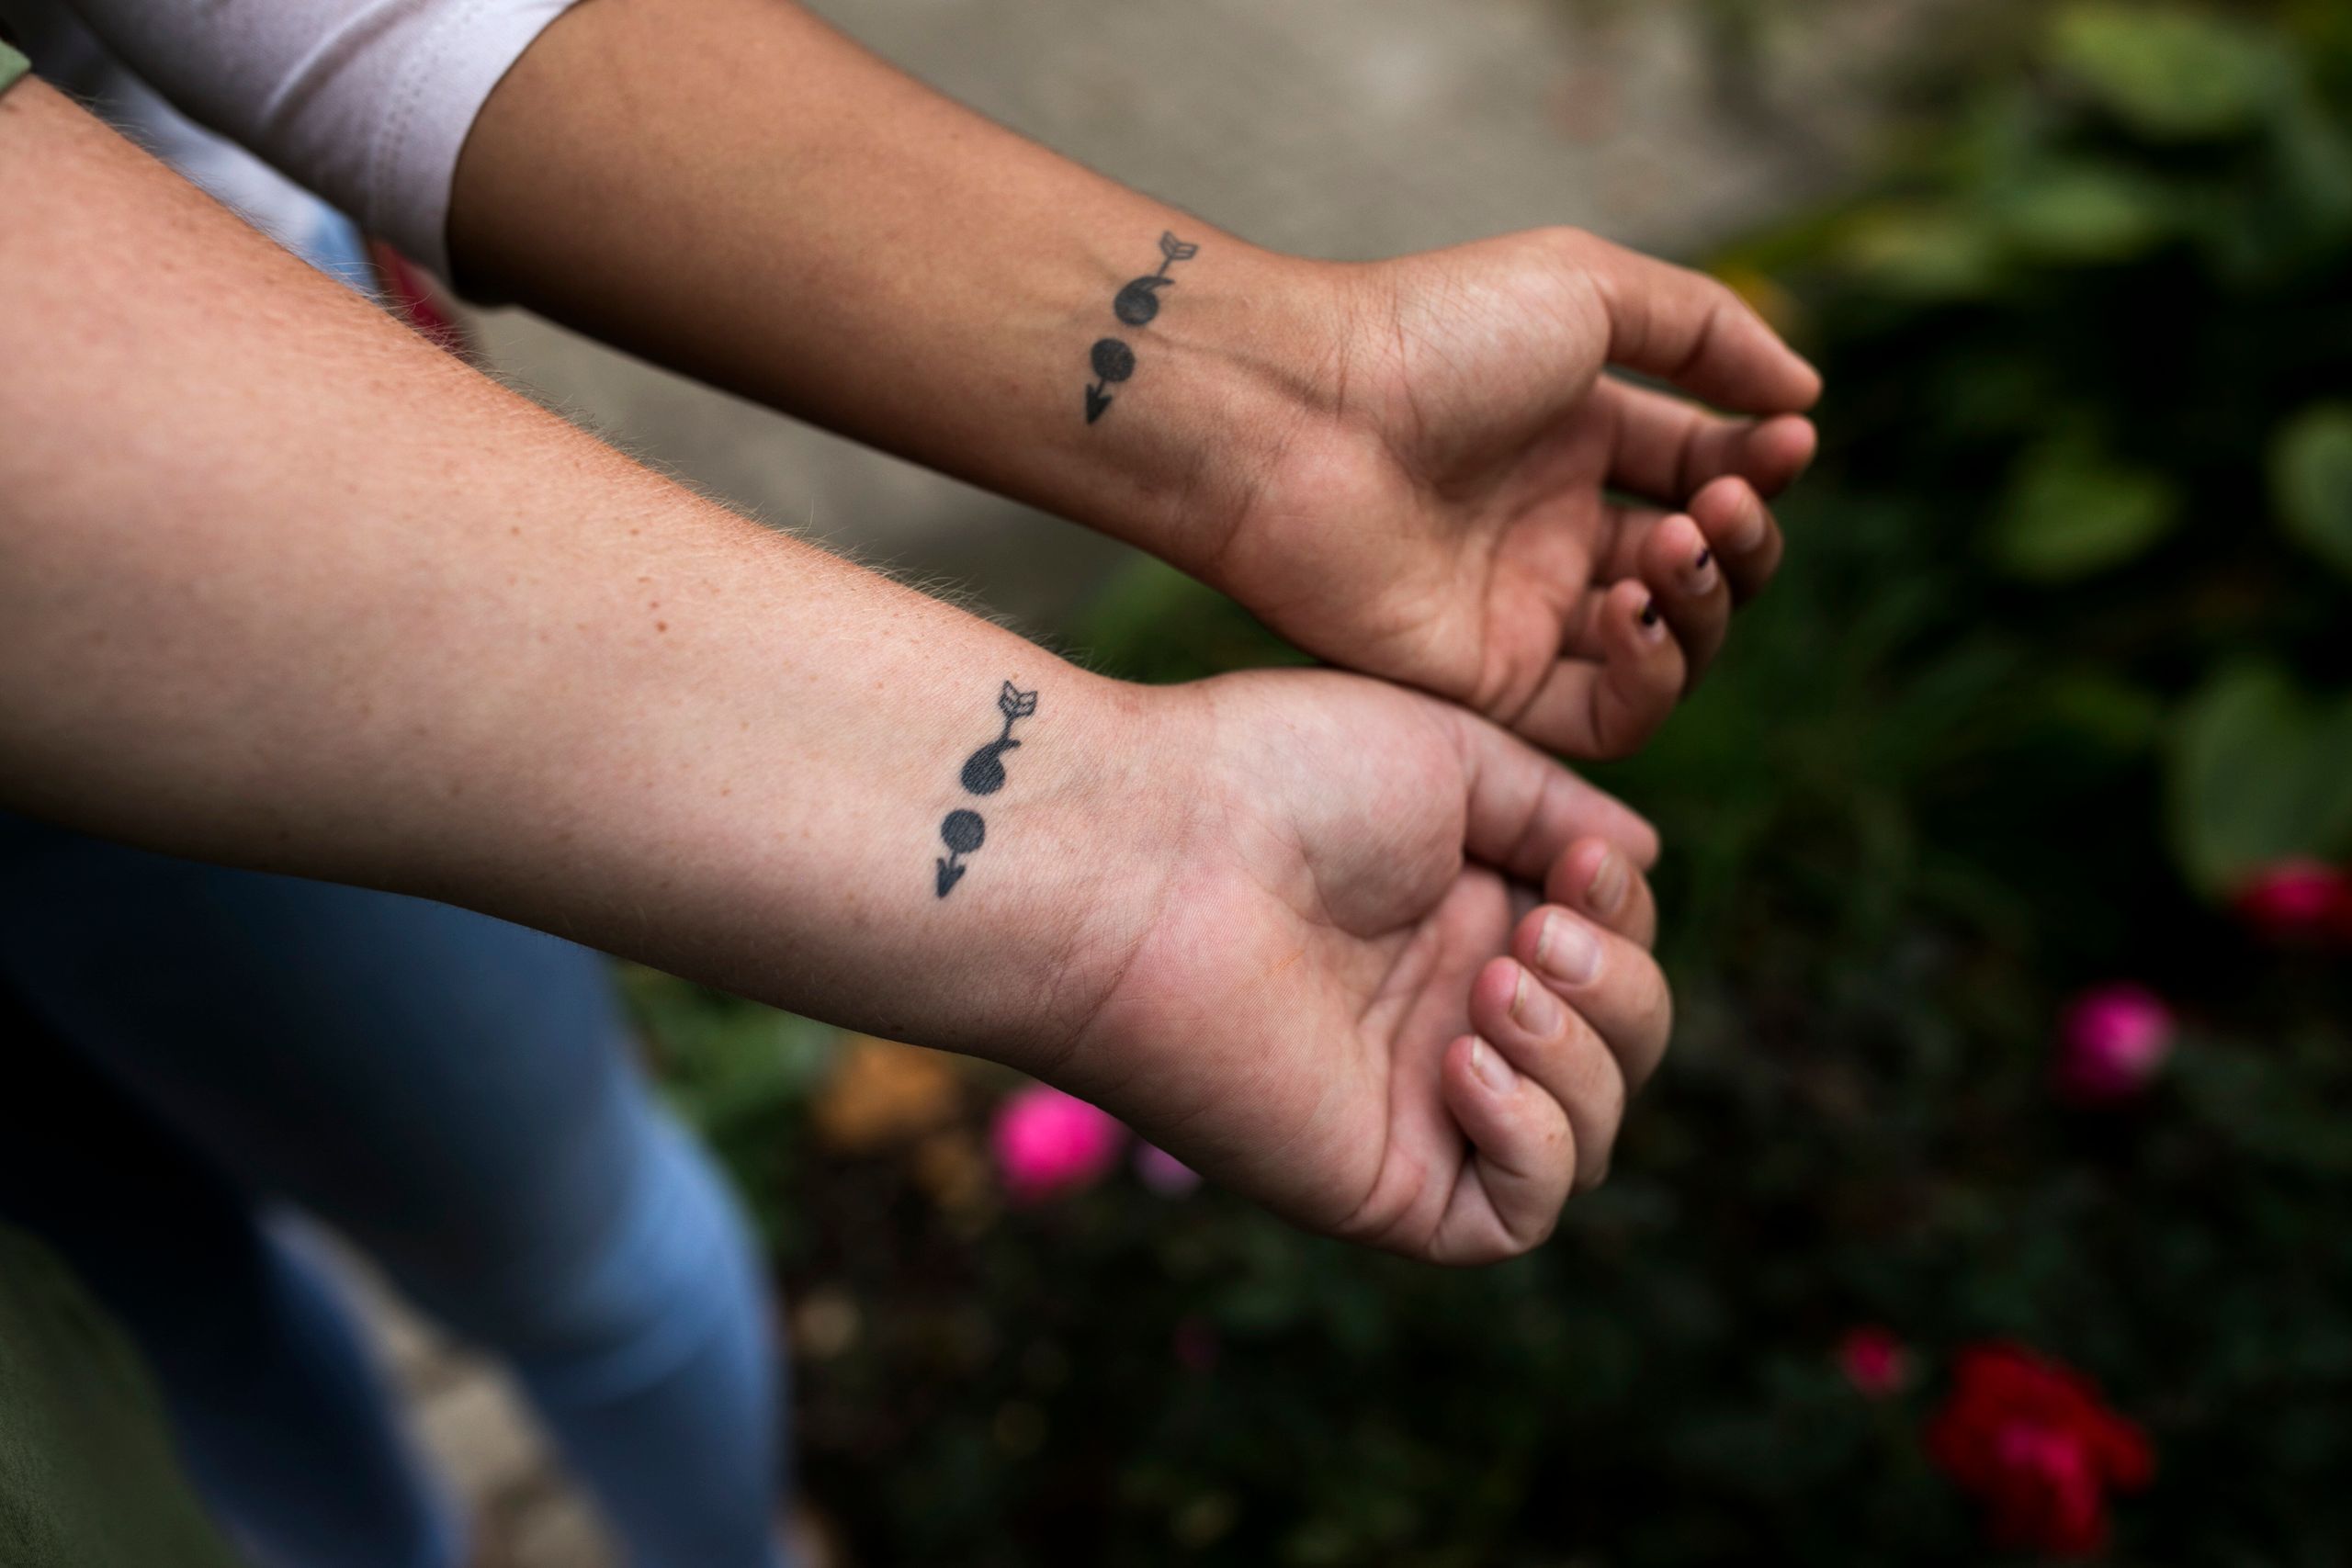 Bresha Meadows and her mother Brandi Meadows show their matching semicolon tattoos.